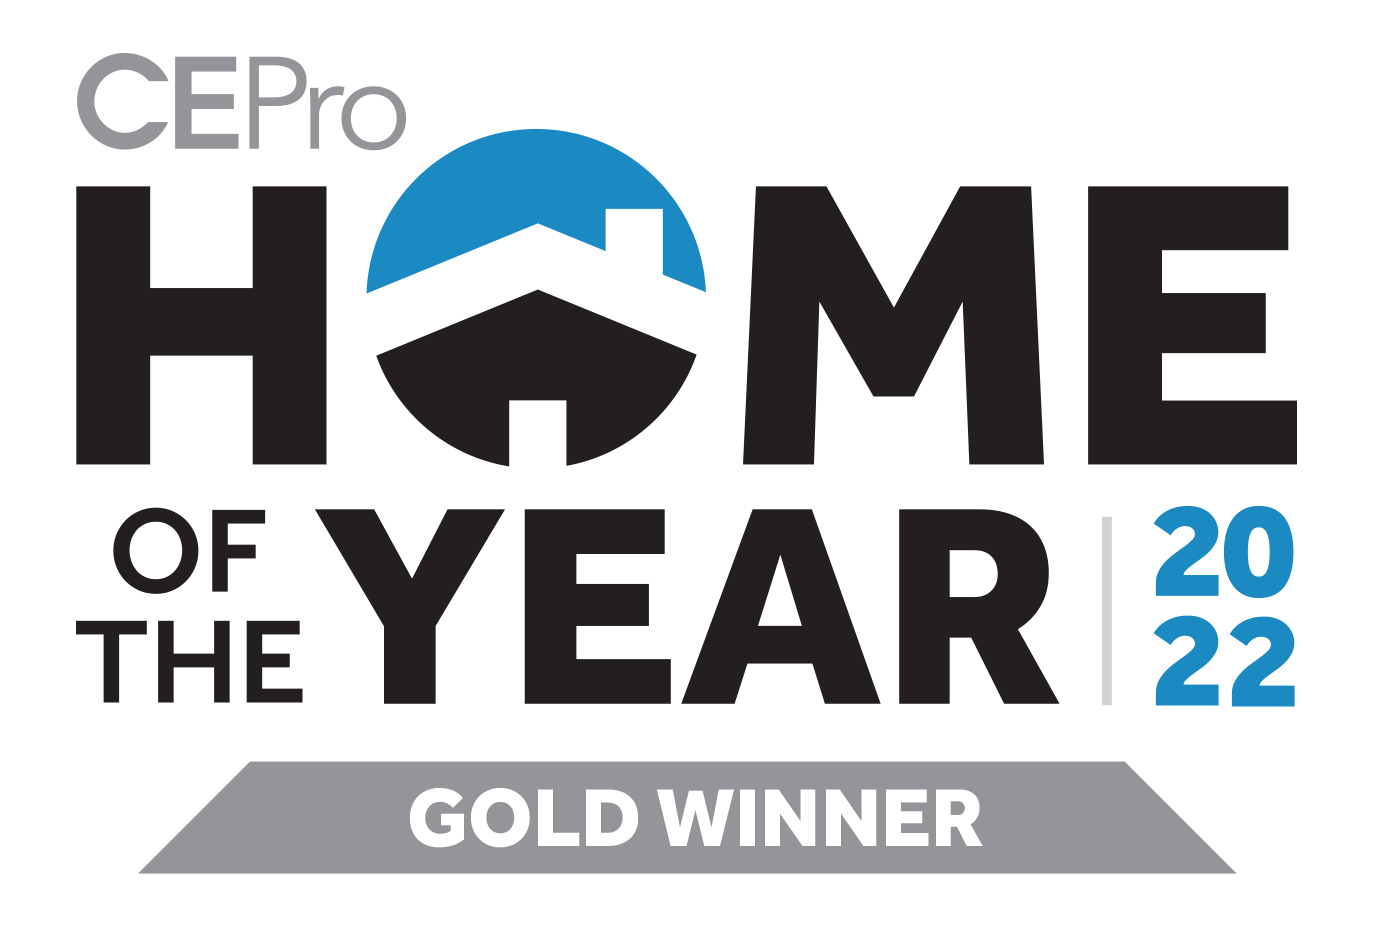 CEPro Home of the Year Gold Winner